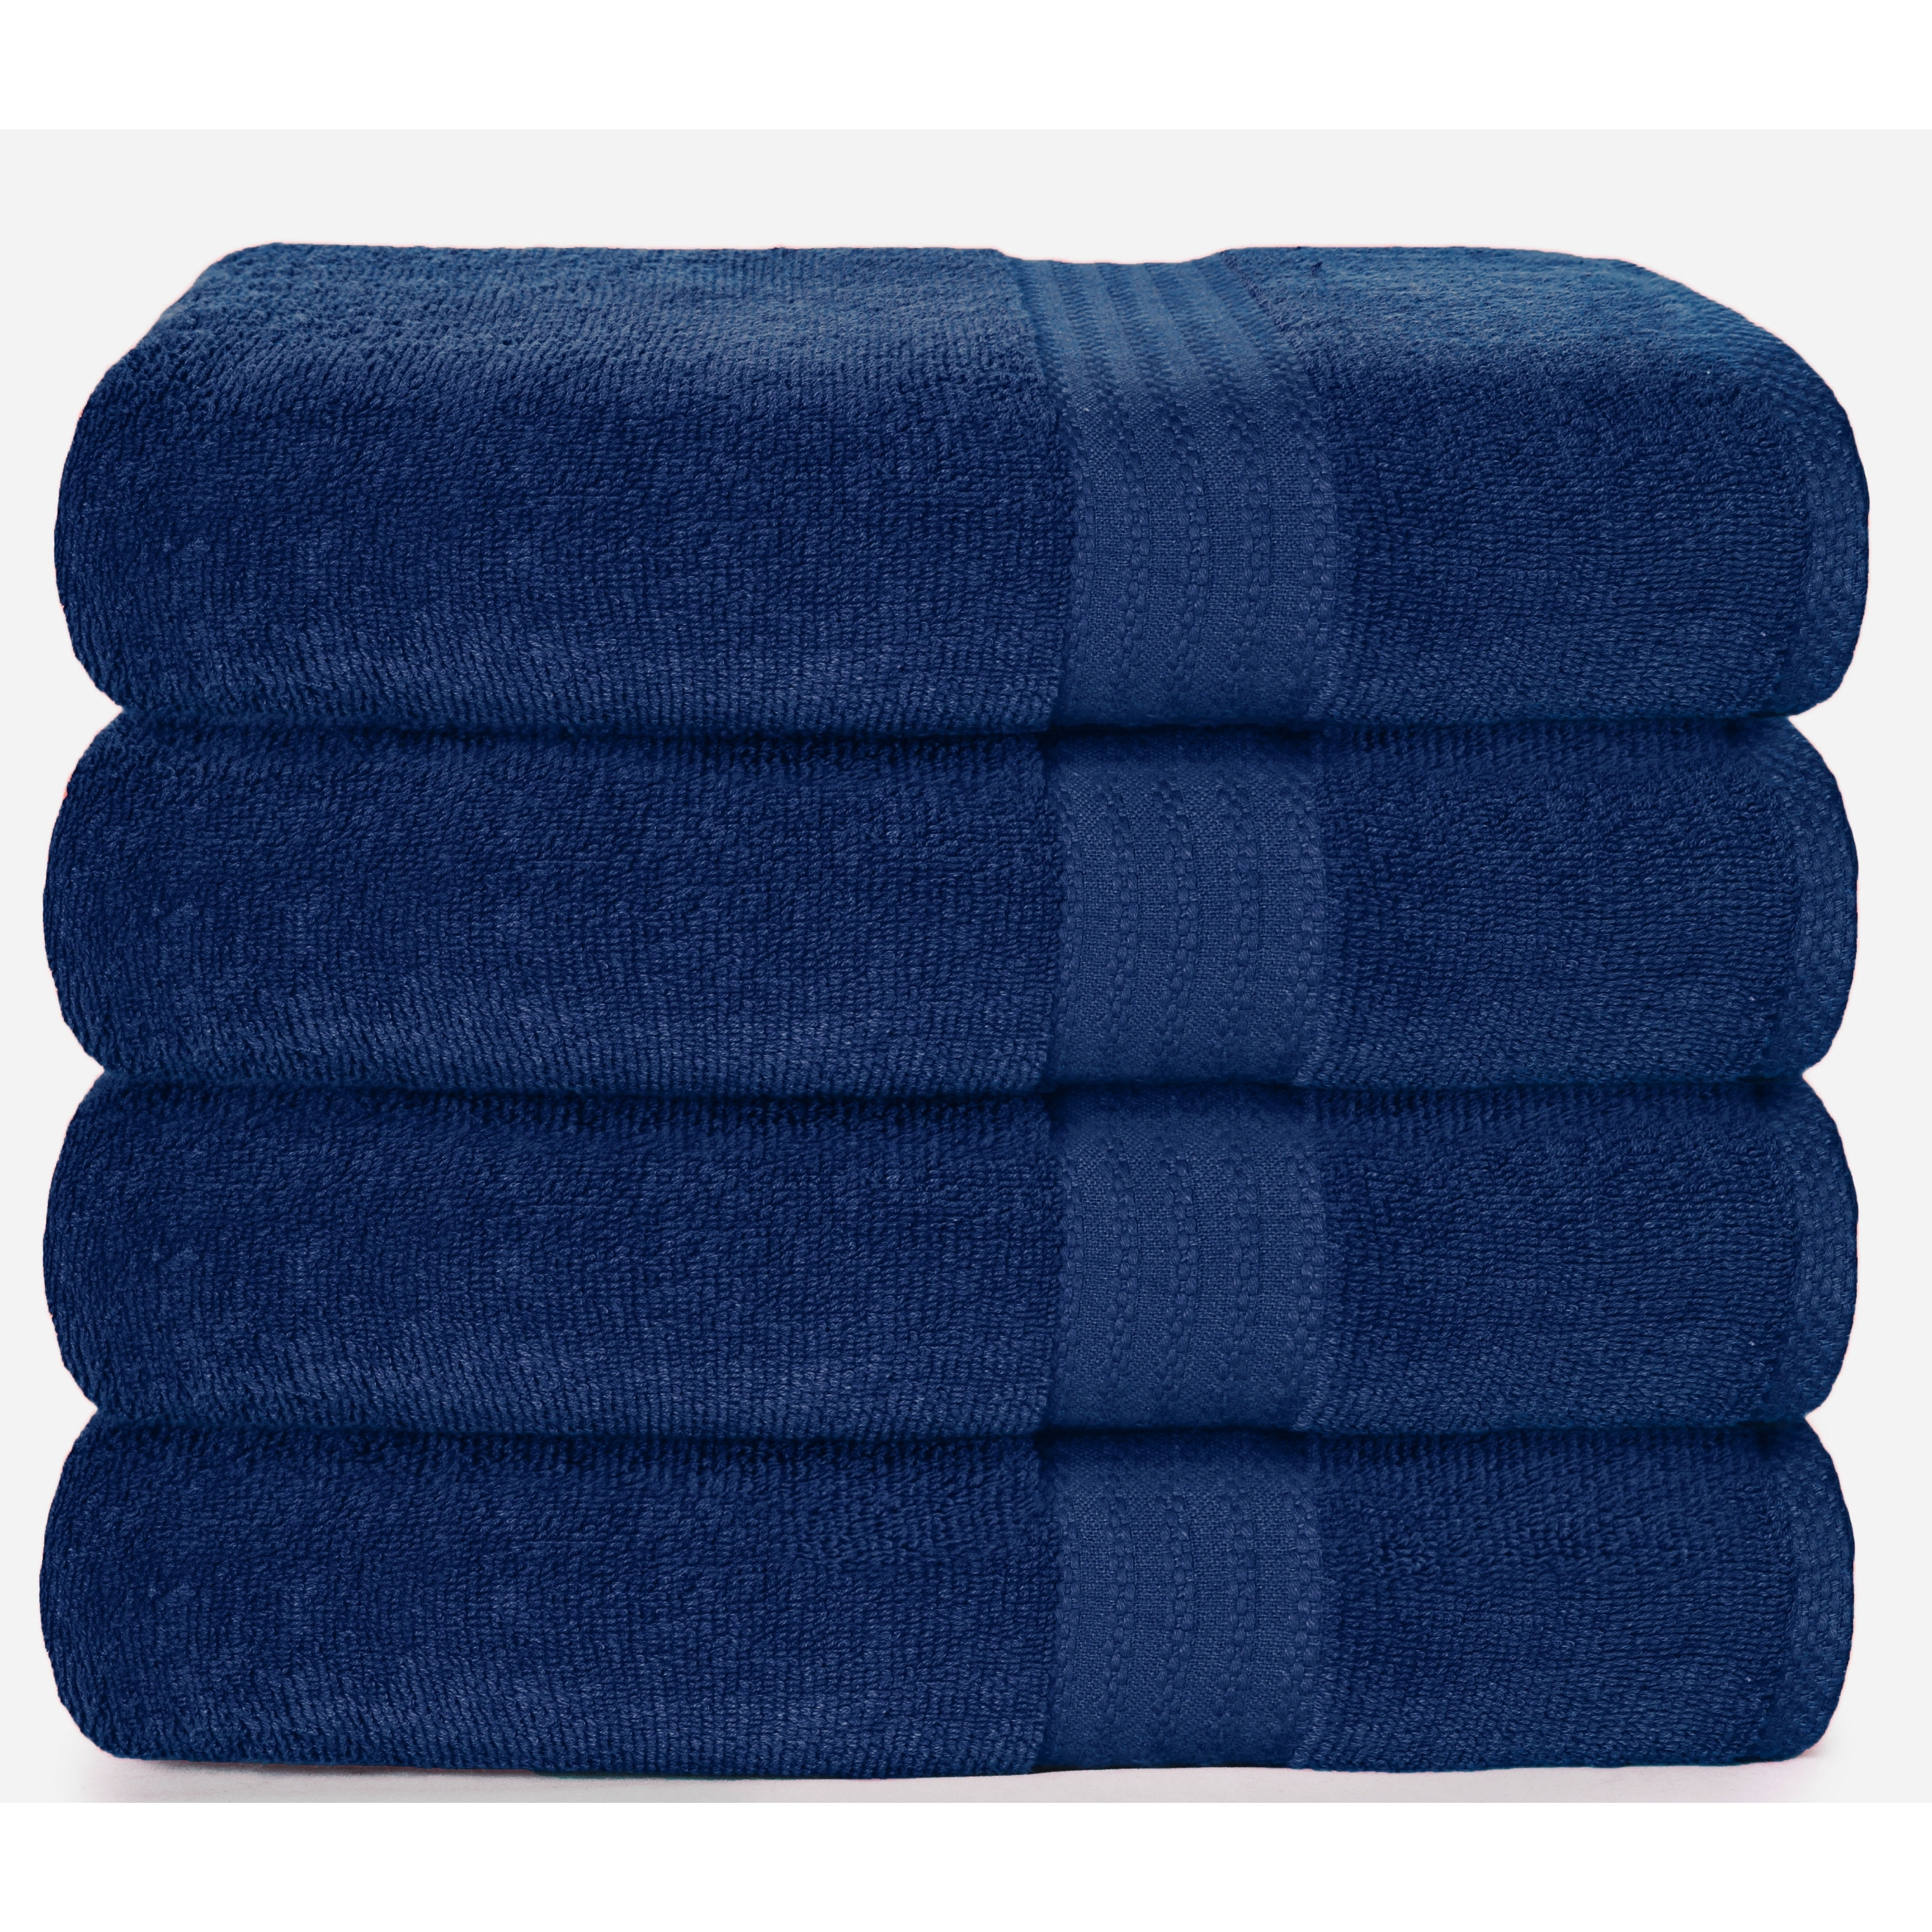 Glamburg Premium Cotton 4 Pack Bath Towel Set - 100% Pure Cotton - 4 Bath Towels 27x54 - Ideal for Everyday Use - Ultra Soft & Highly Absorbent 